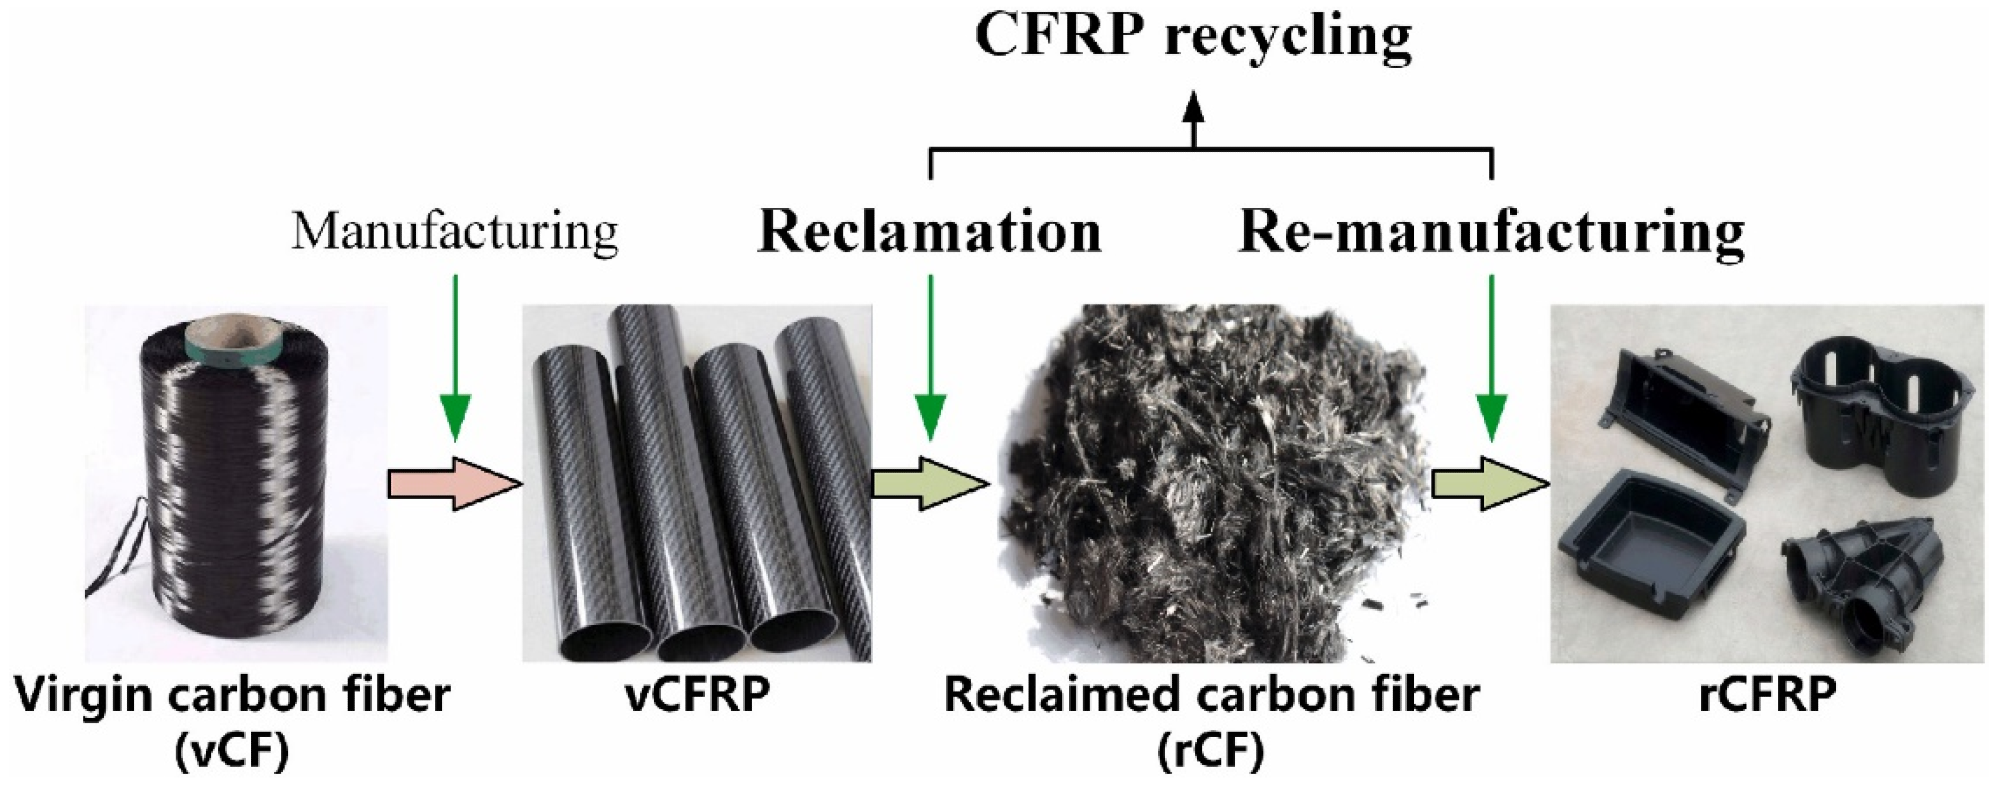 Recycling Process from Virgin Carbon Fiber to CFRP.